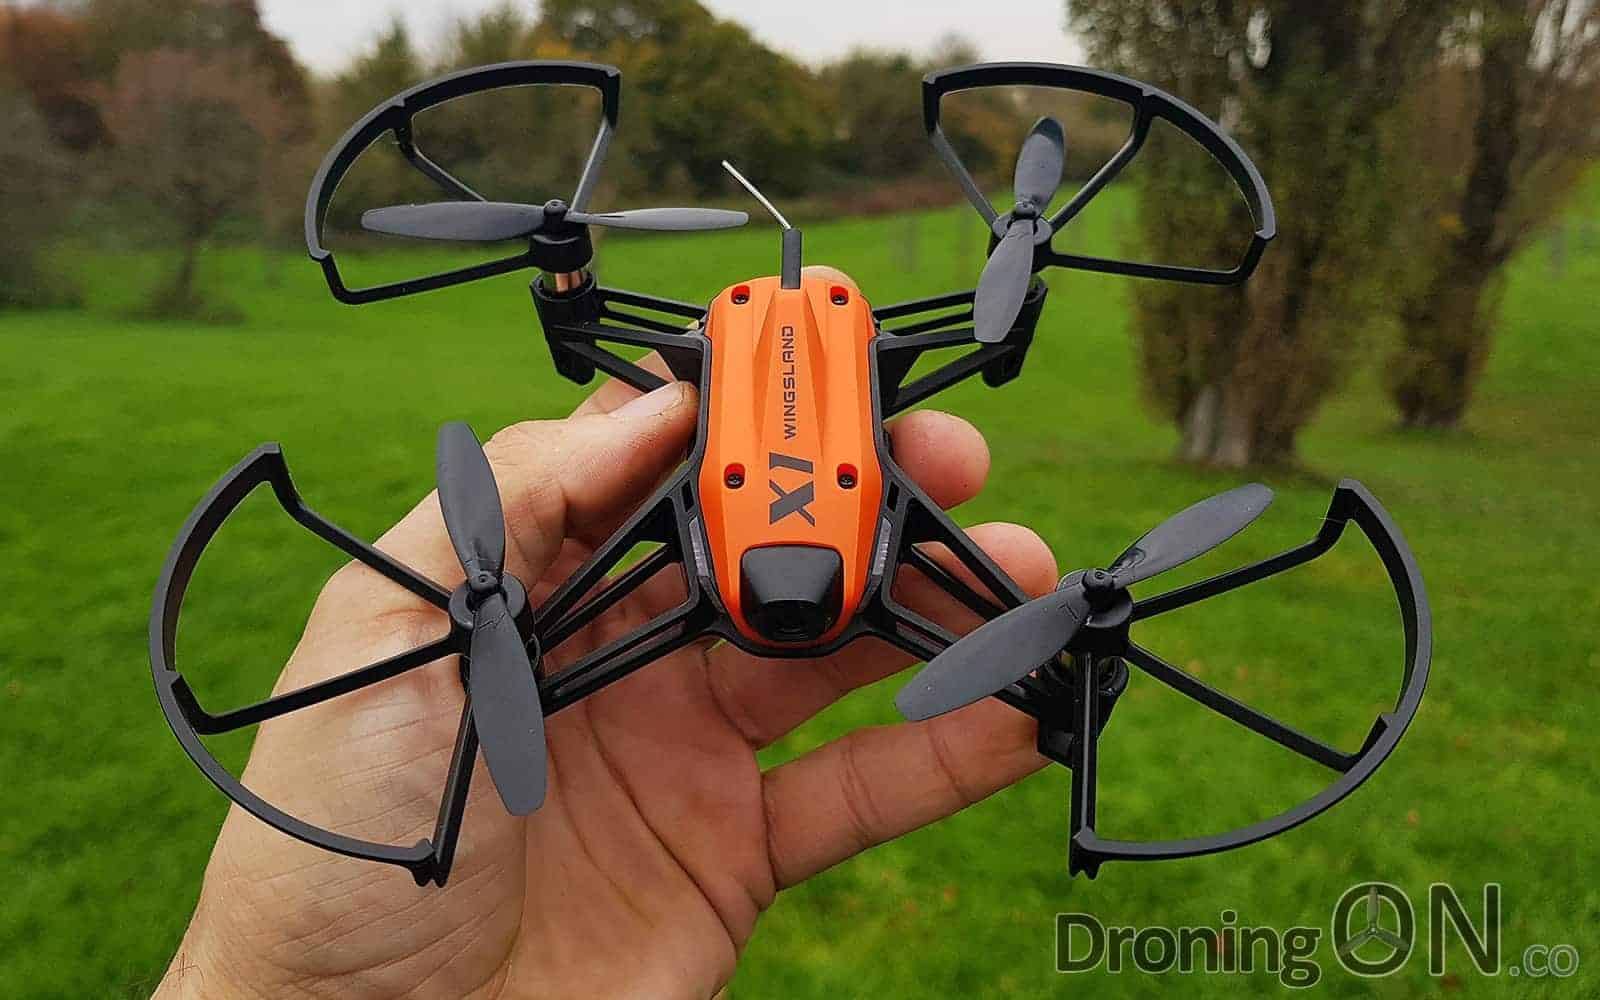 Wingsland launched the brand new X1 FPV racing drone.